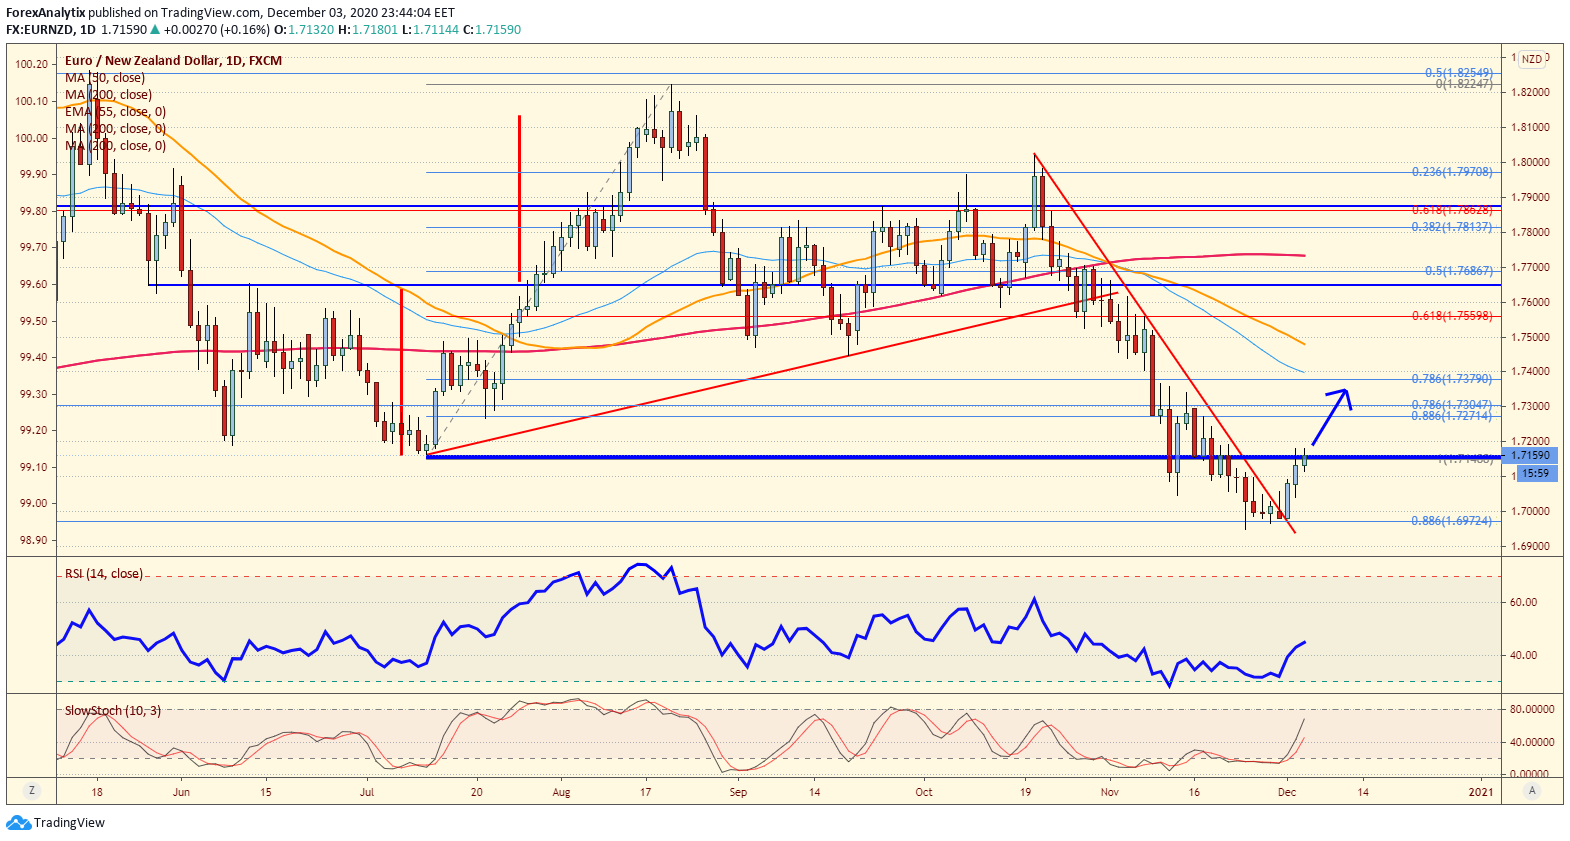 EUR/NZD Daily Chart.